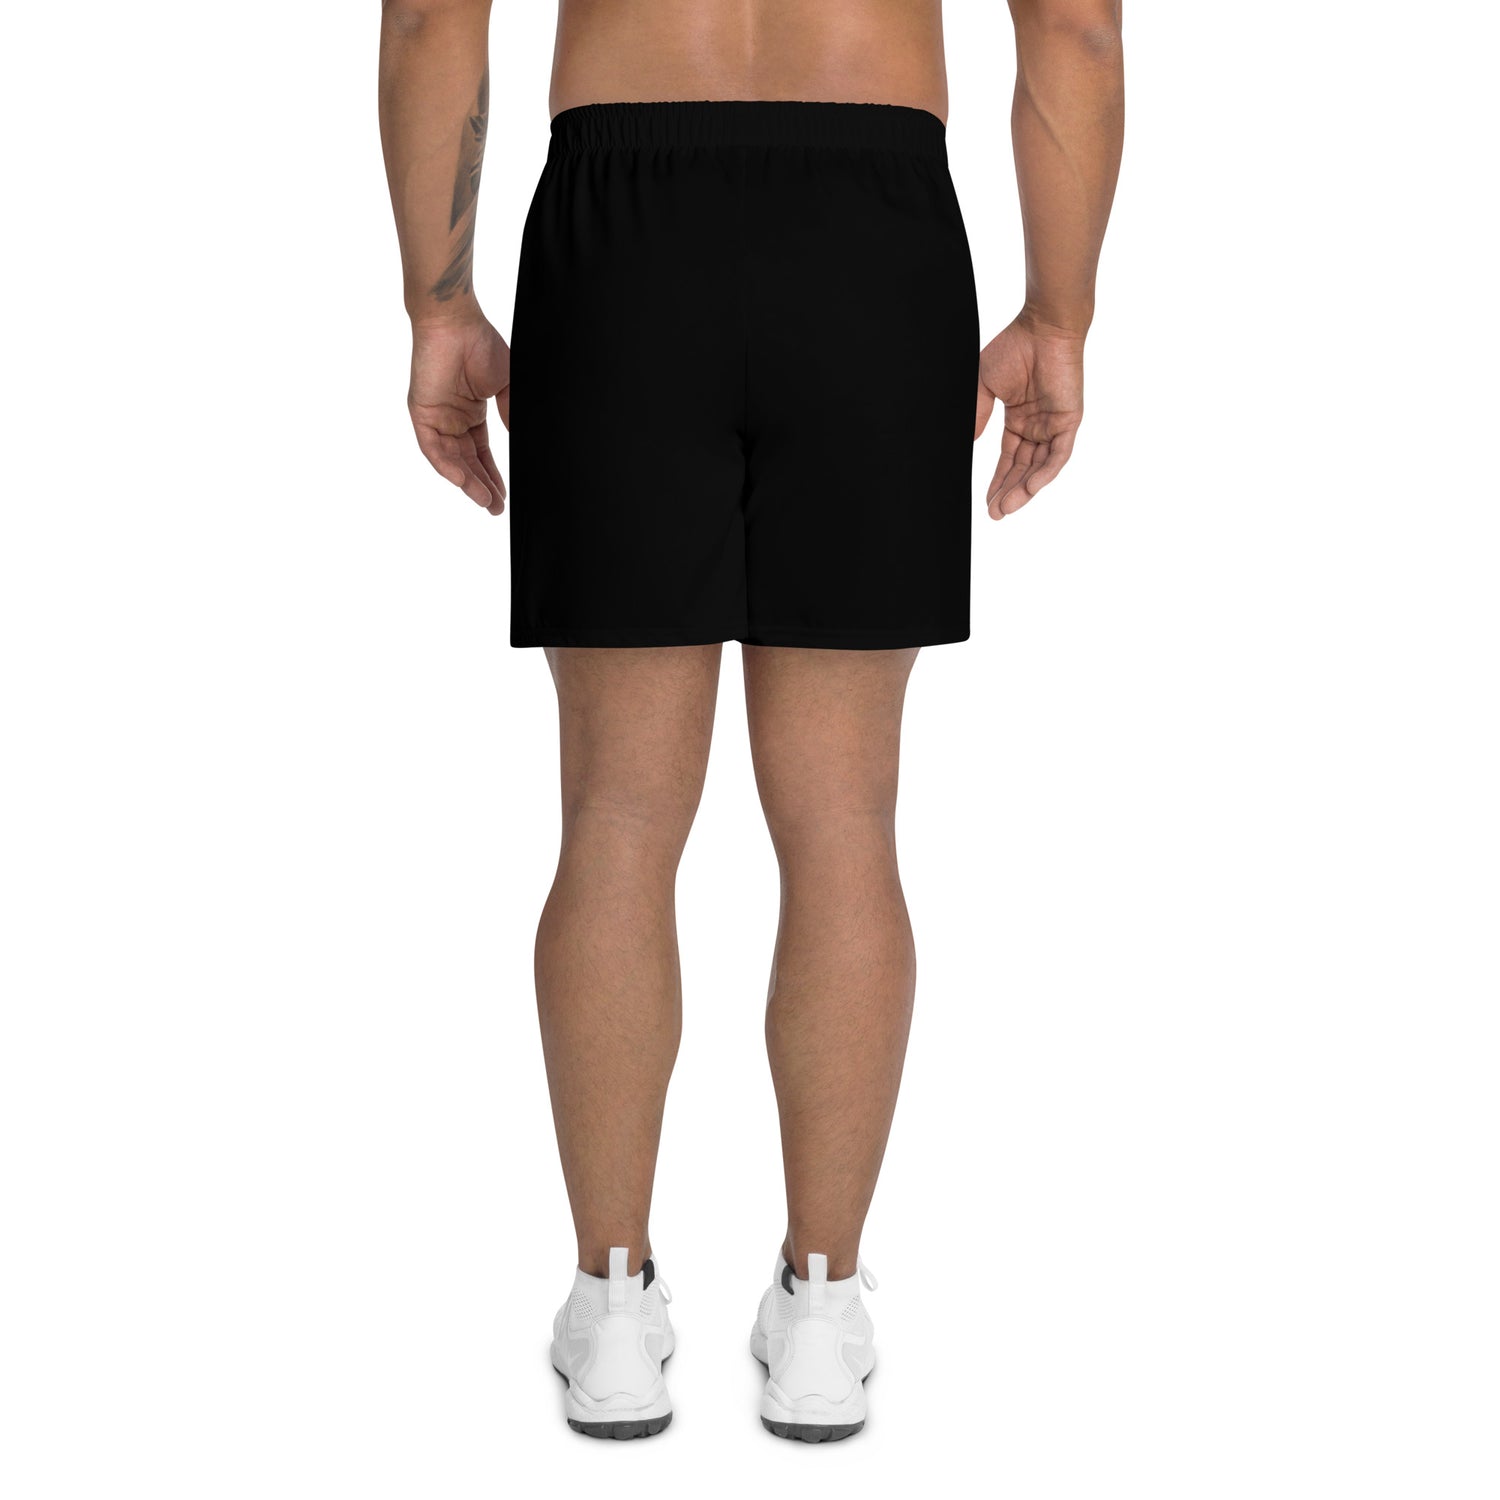 Back facing view of the black Champletes Light Speed shorts.